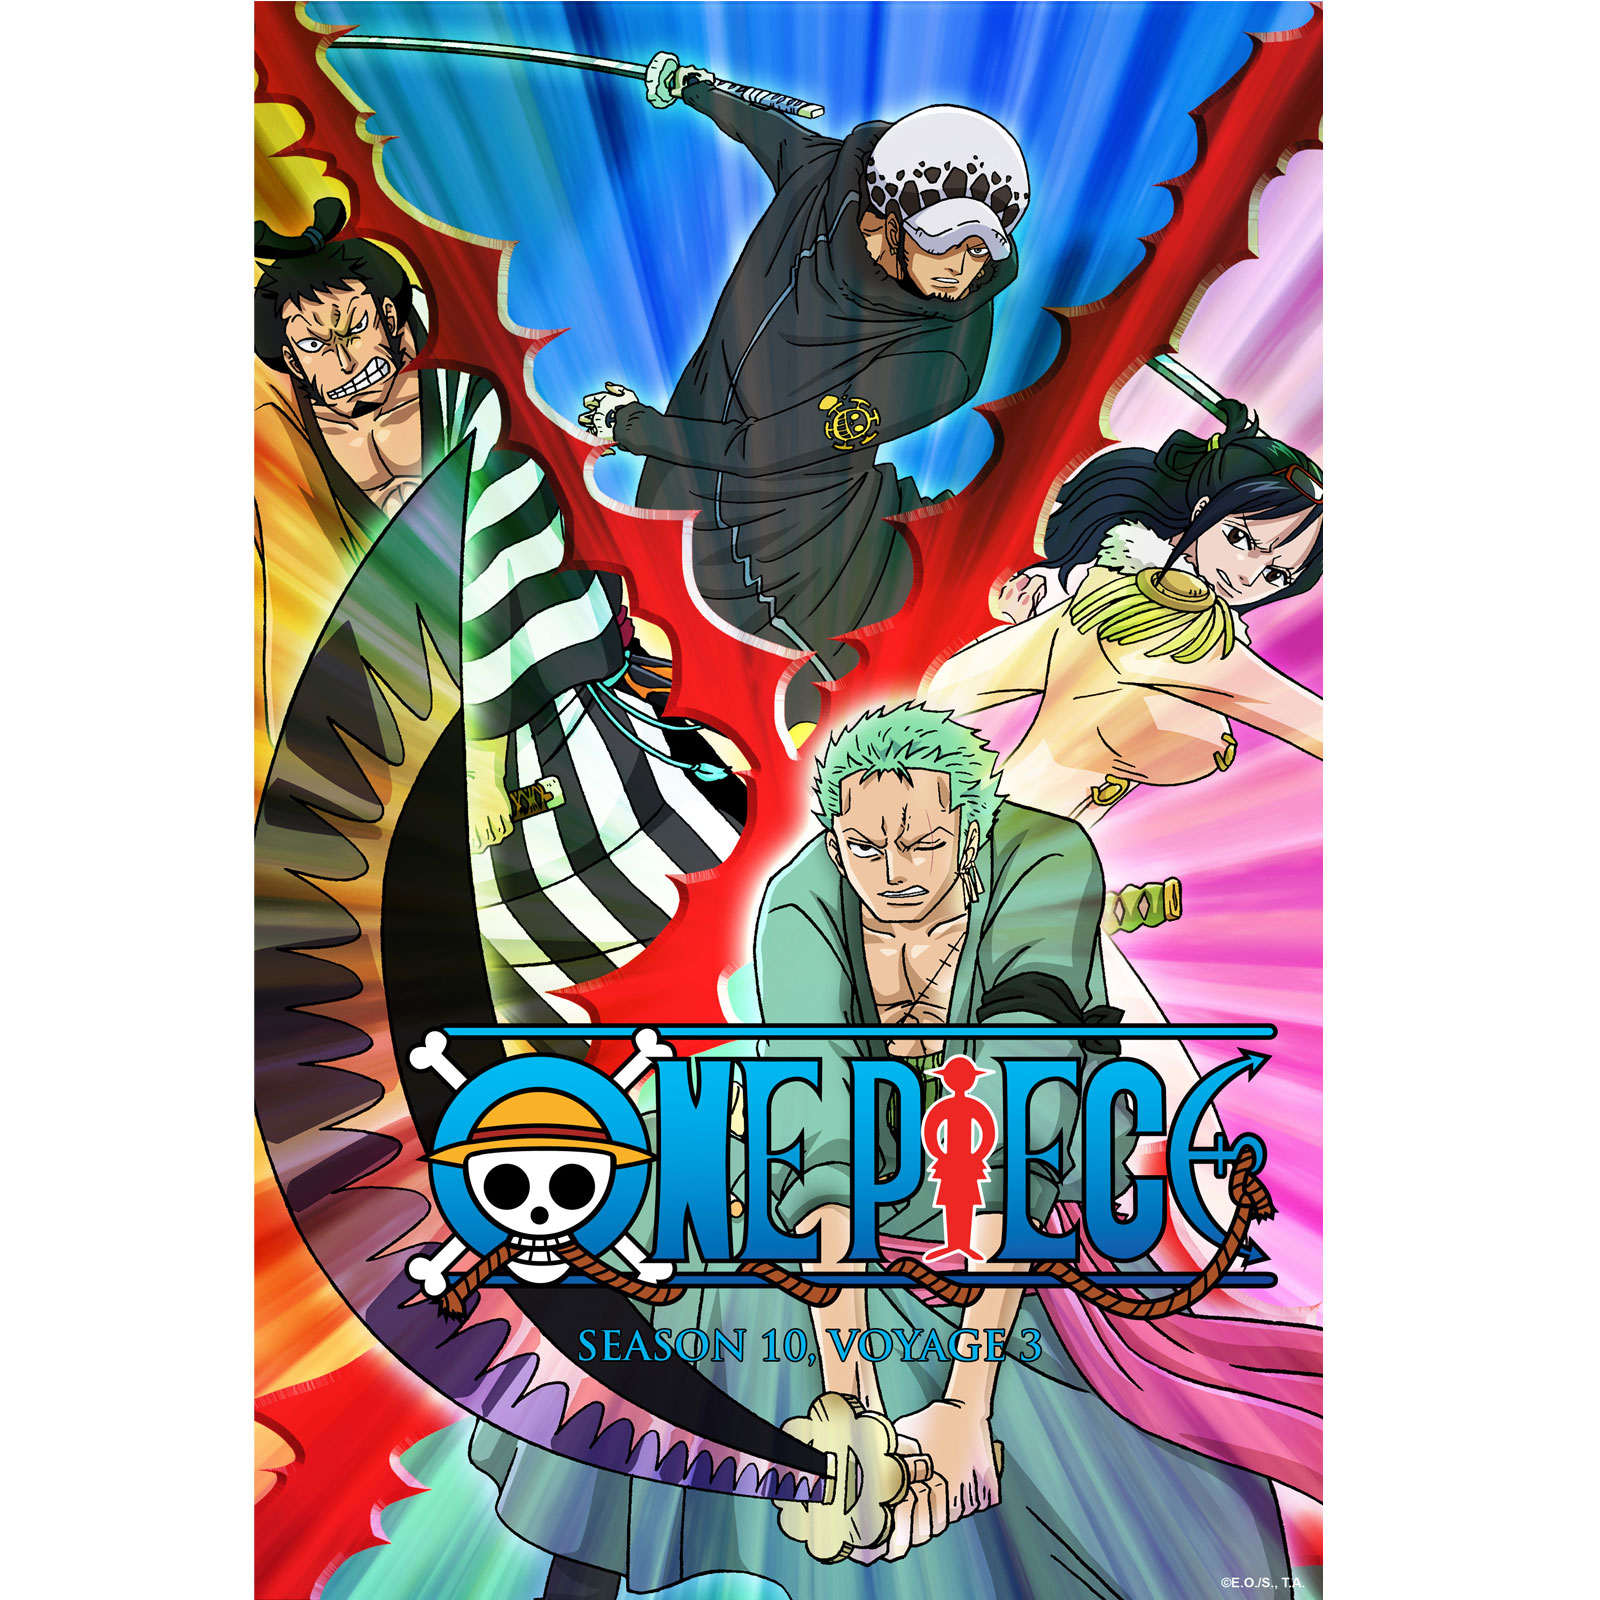 NEW ENGLISH DUB EPISODES FOR ONE PIECE LANDING ON DIGITAL ON OCTOBER 6 AND WILL REACH THE FINALE OF THE PUNK HAZARD SAGA IN 2020!